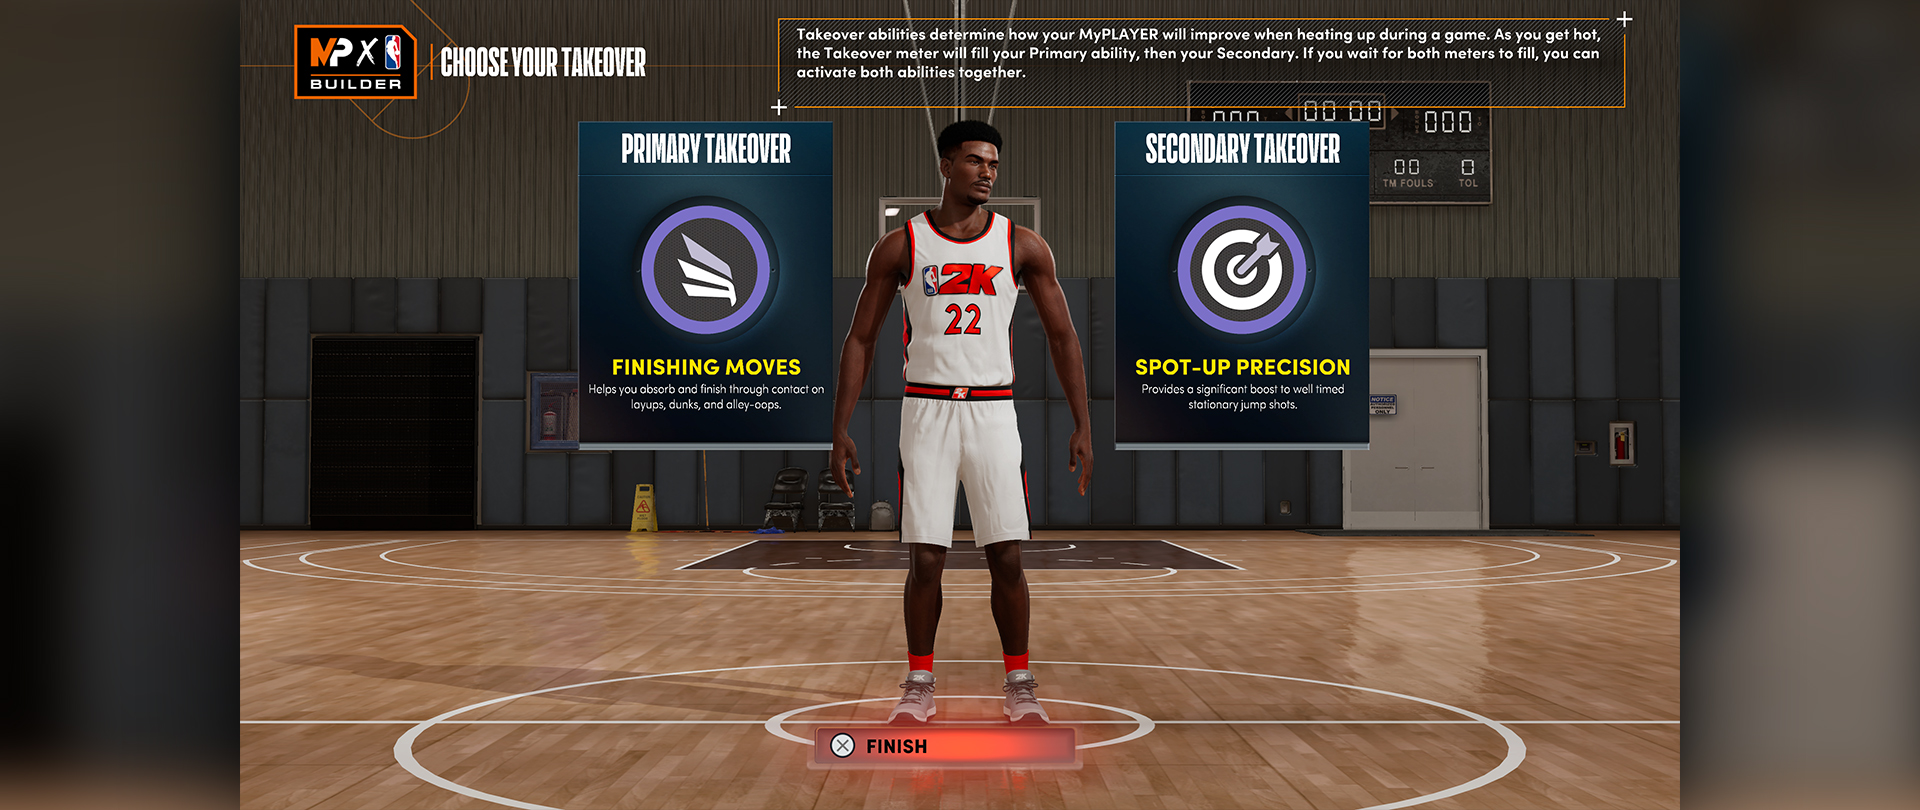 MyPLAYER Builder Choose Your Takeover